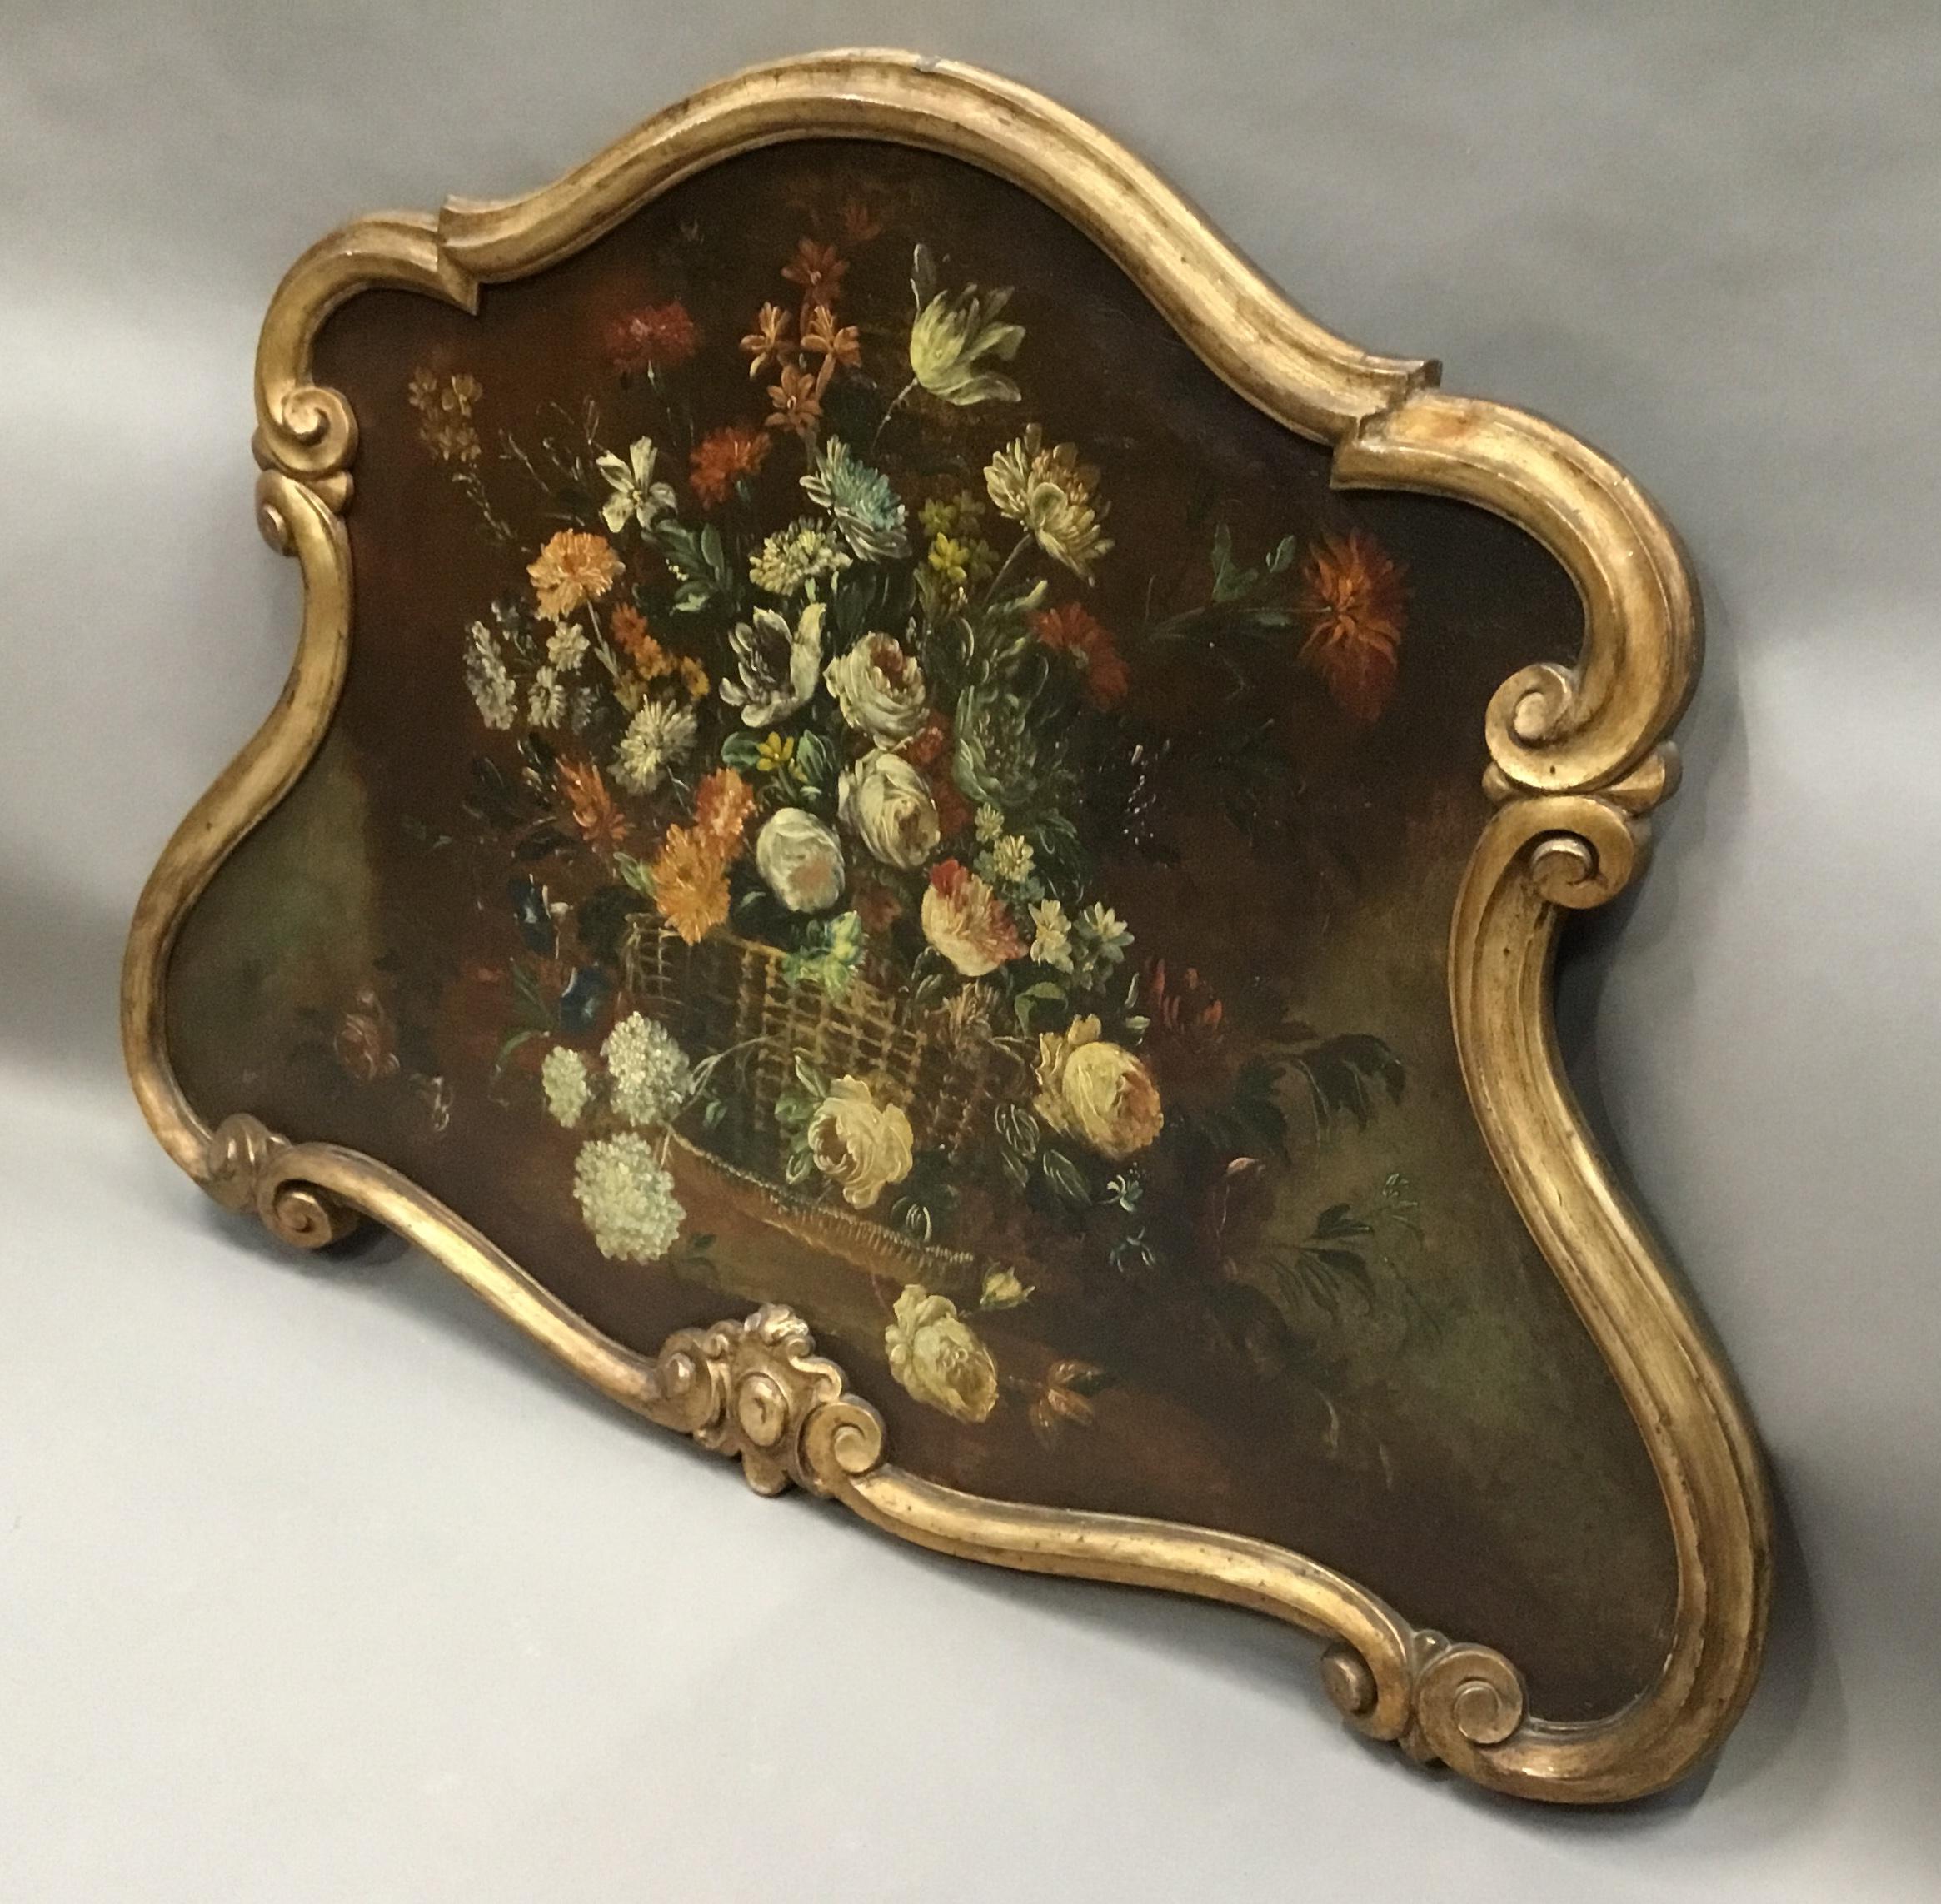 Late 18th century Dutch still life oil painting of unusual cartouche shape; the oil painting on canvas of an oval basket, overflowing with colorful flowers, housed in its original carved, scrollwork, giltwood frame. Very good original